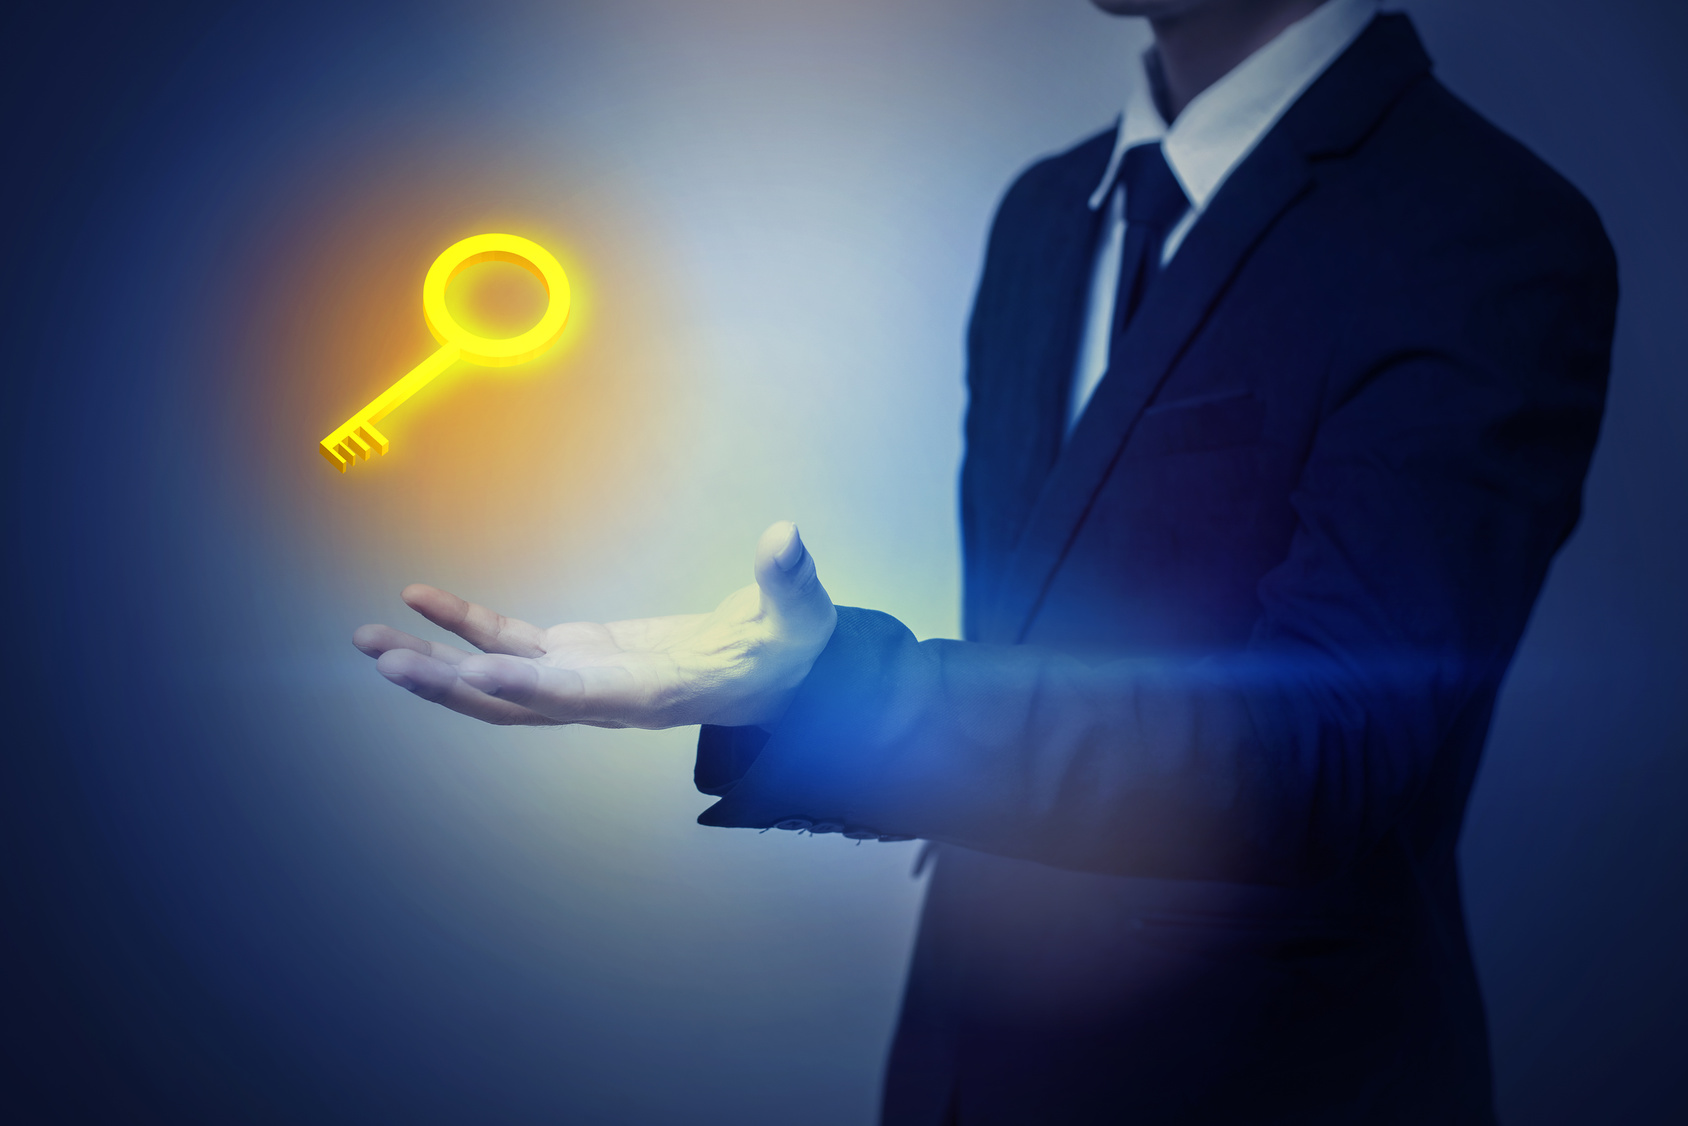 A person wearing a suit with a glowing key floating